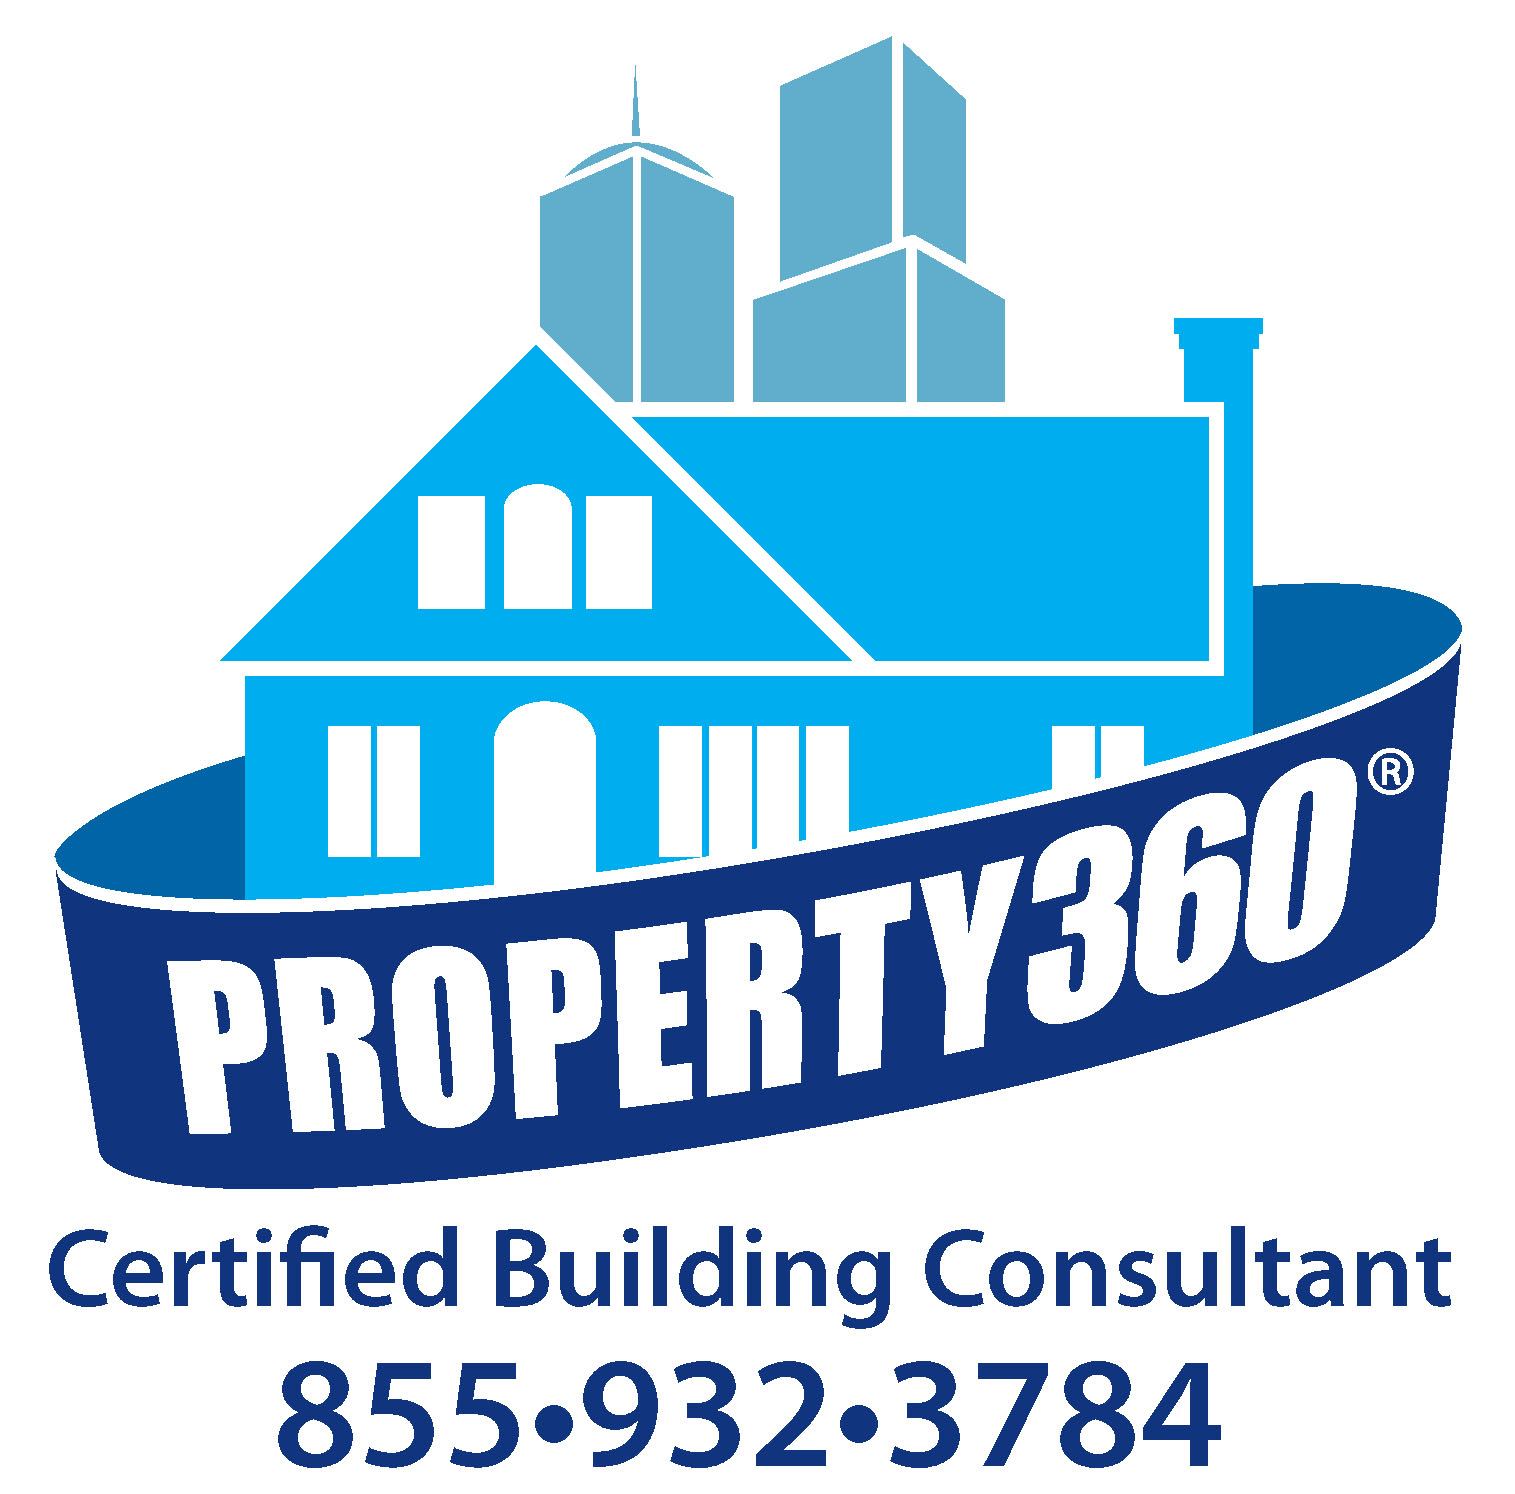 Certified Building Consultant logo